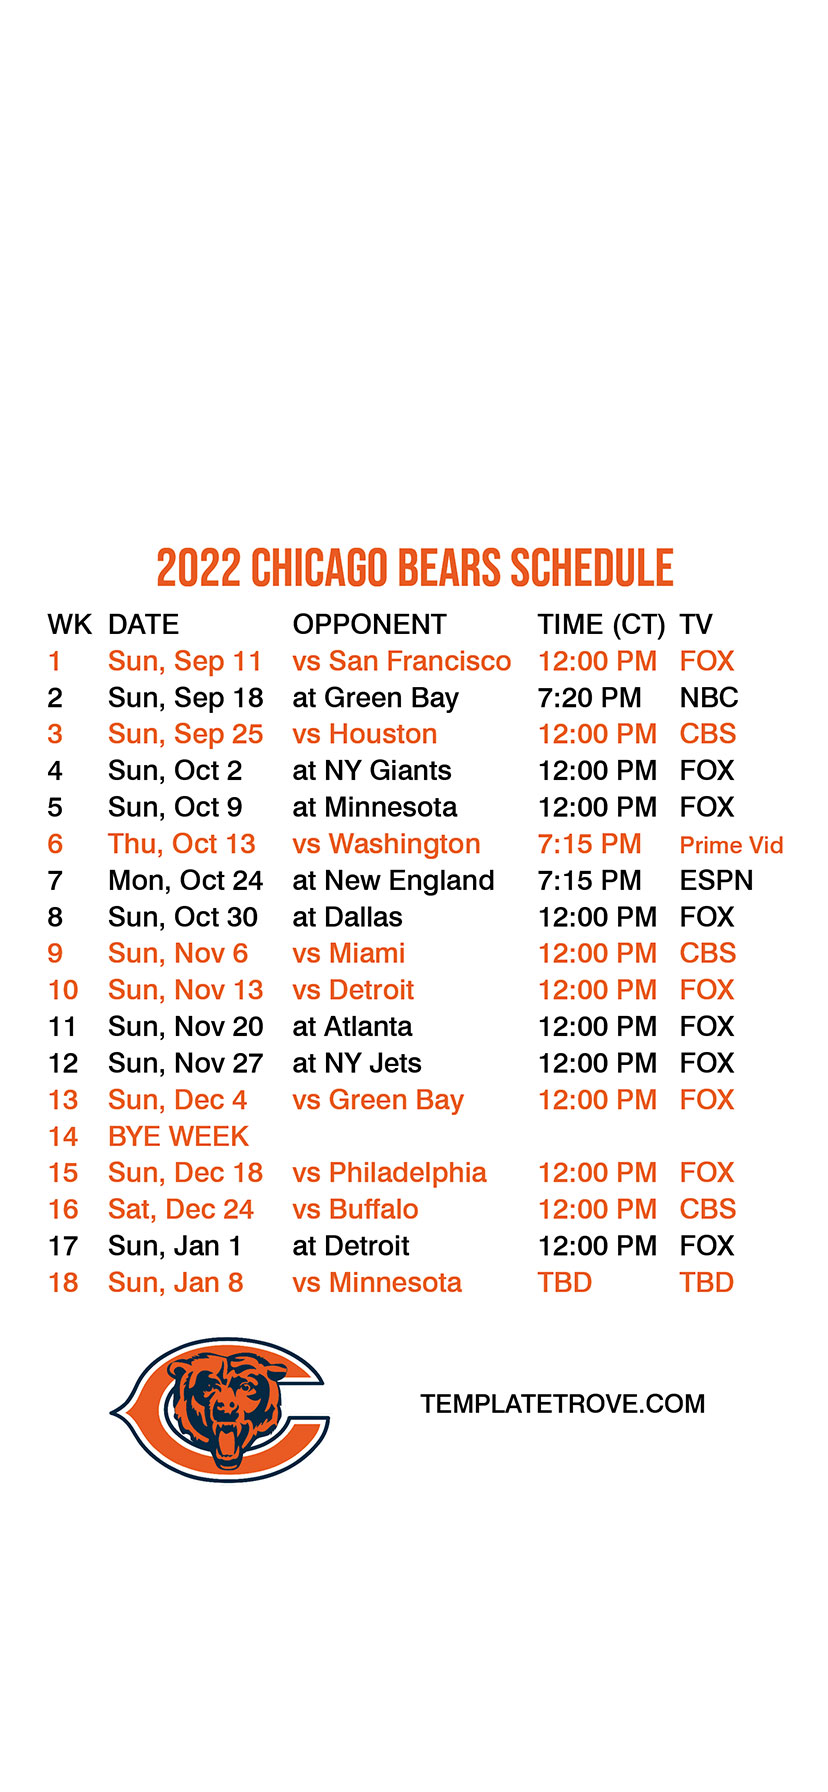 2022-2023 Chicago Bears Lock Screen Schedule for iPhone 6-7-8 Plus